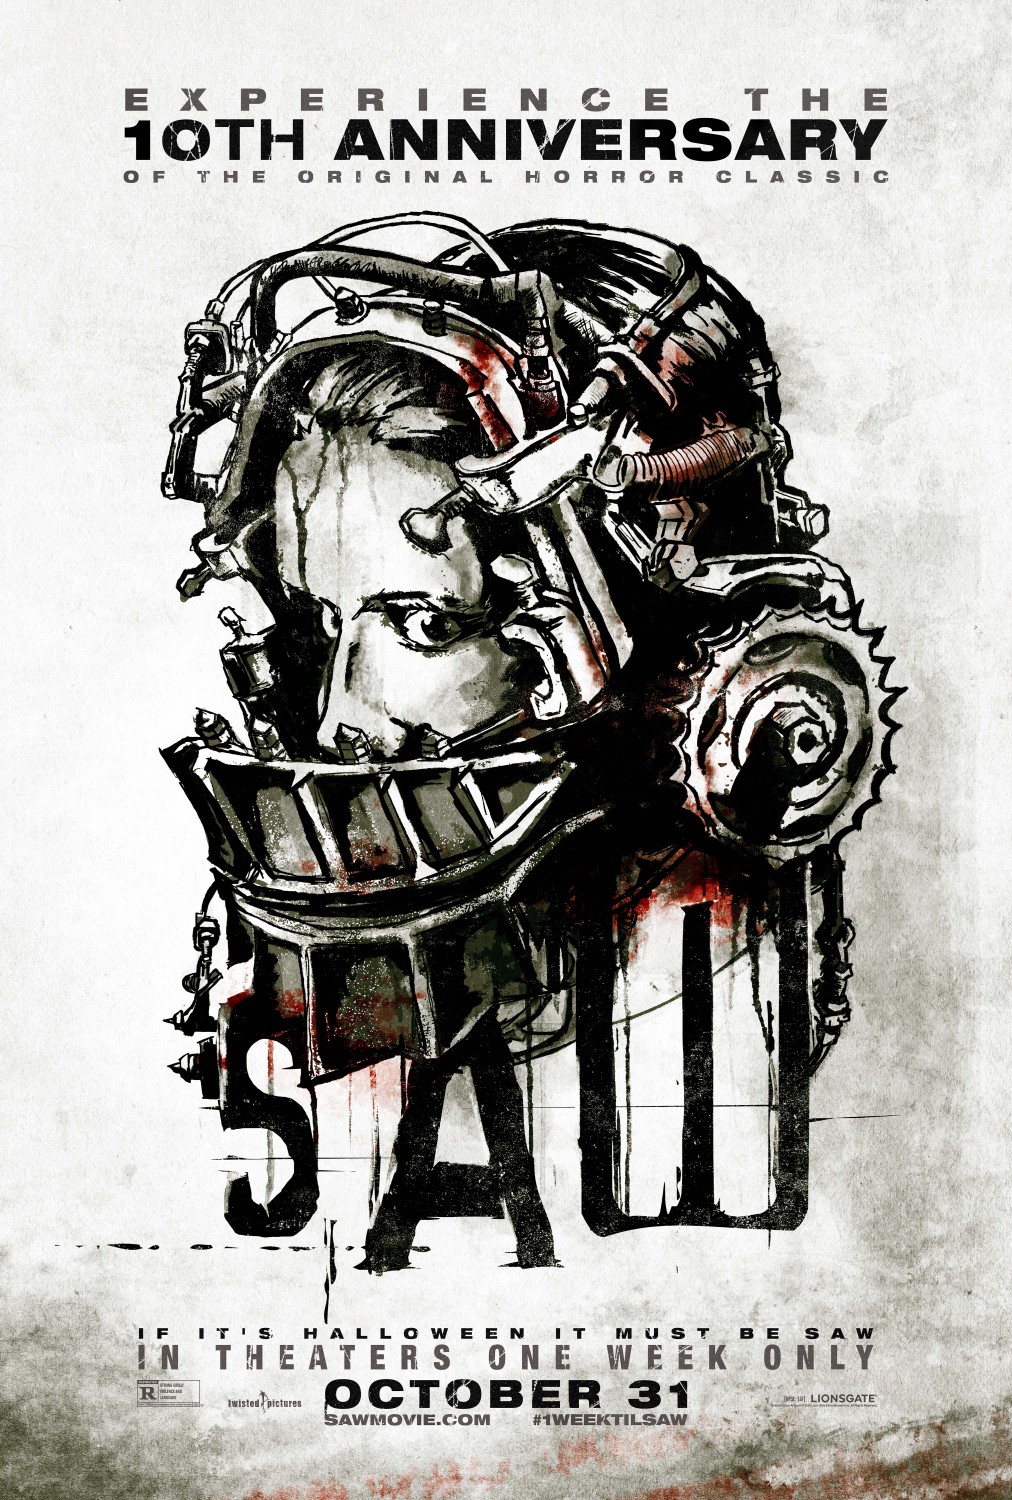 Extra Large Movie Poster Image for Saw (#13 of 14)